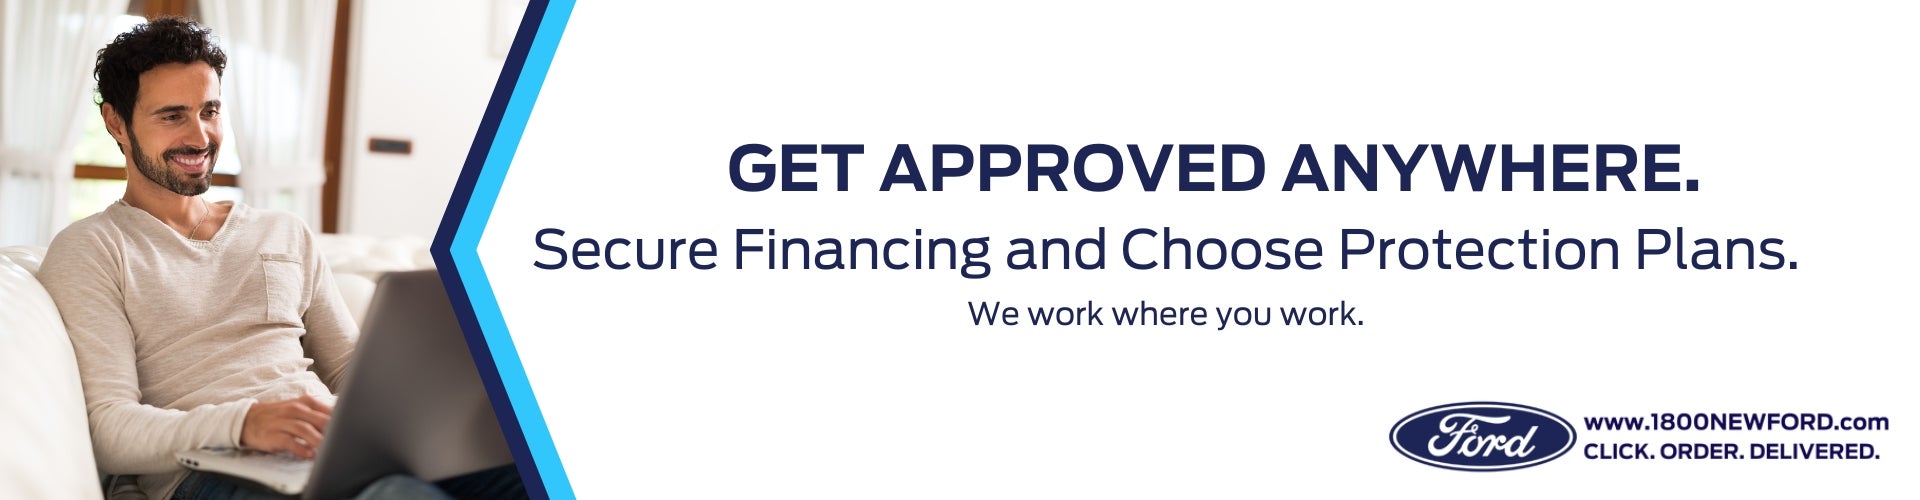 get approved anywhere financing options